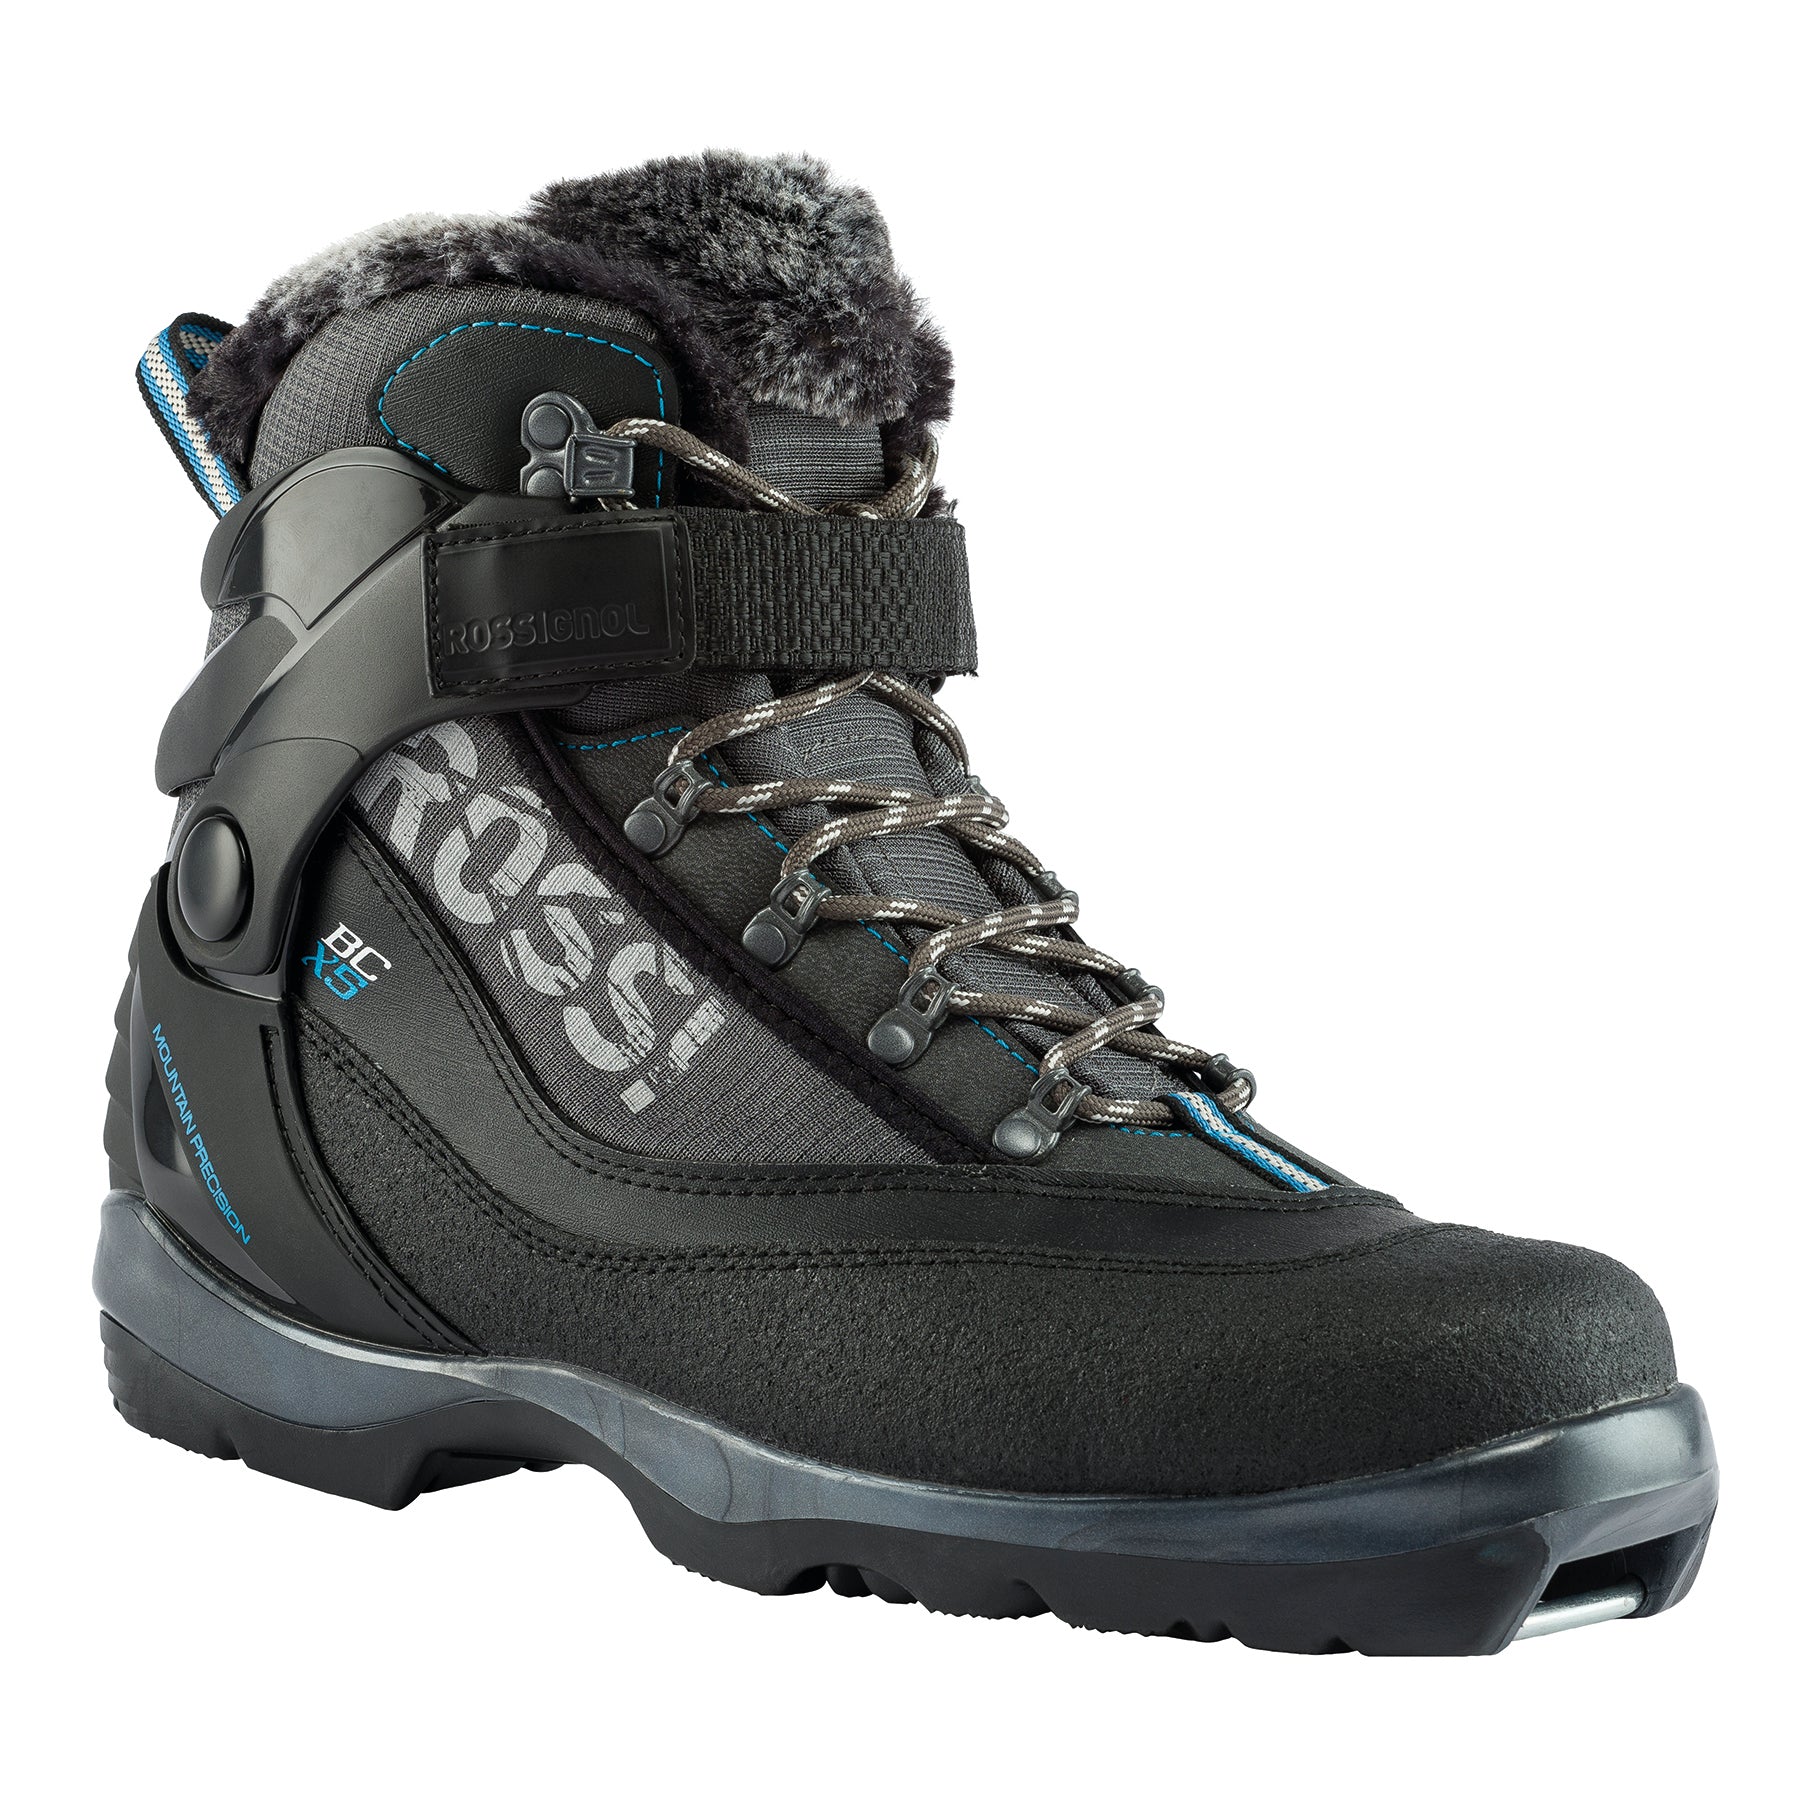 Touring & Backcountry Boots